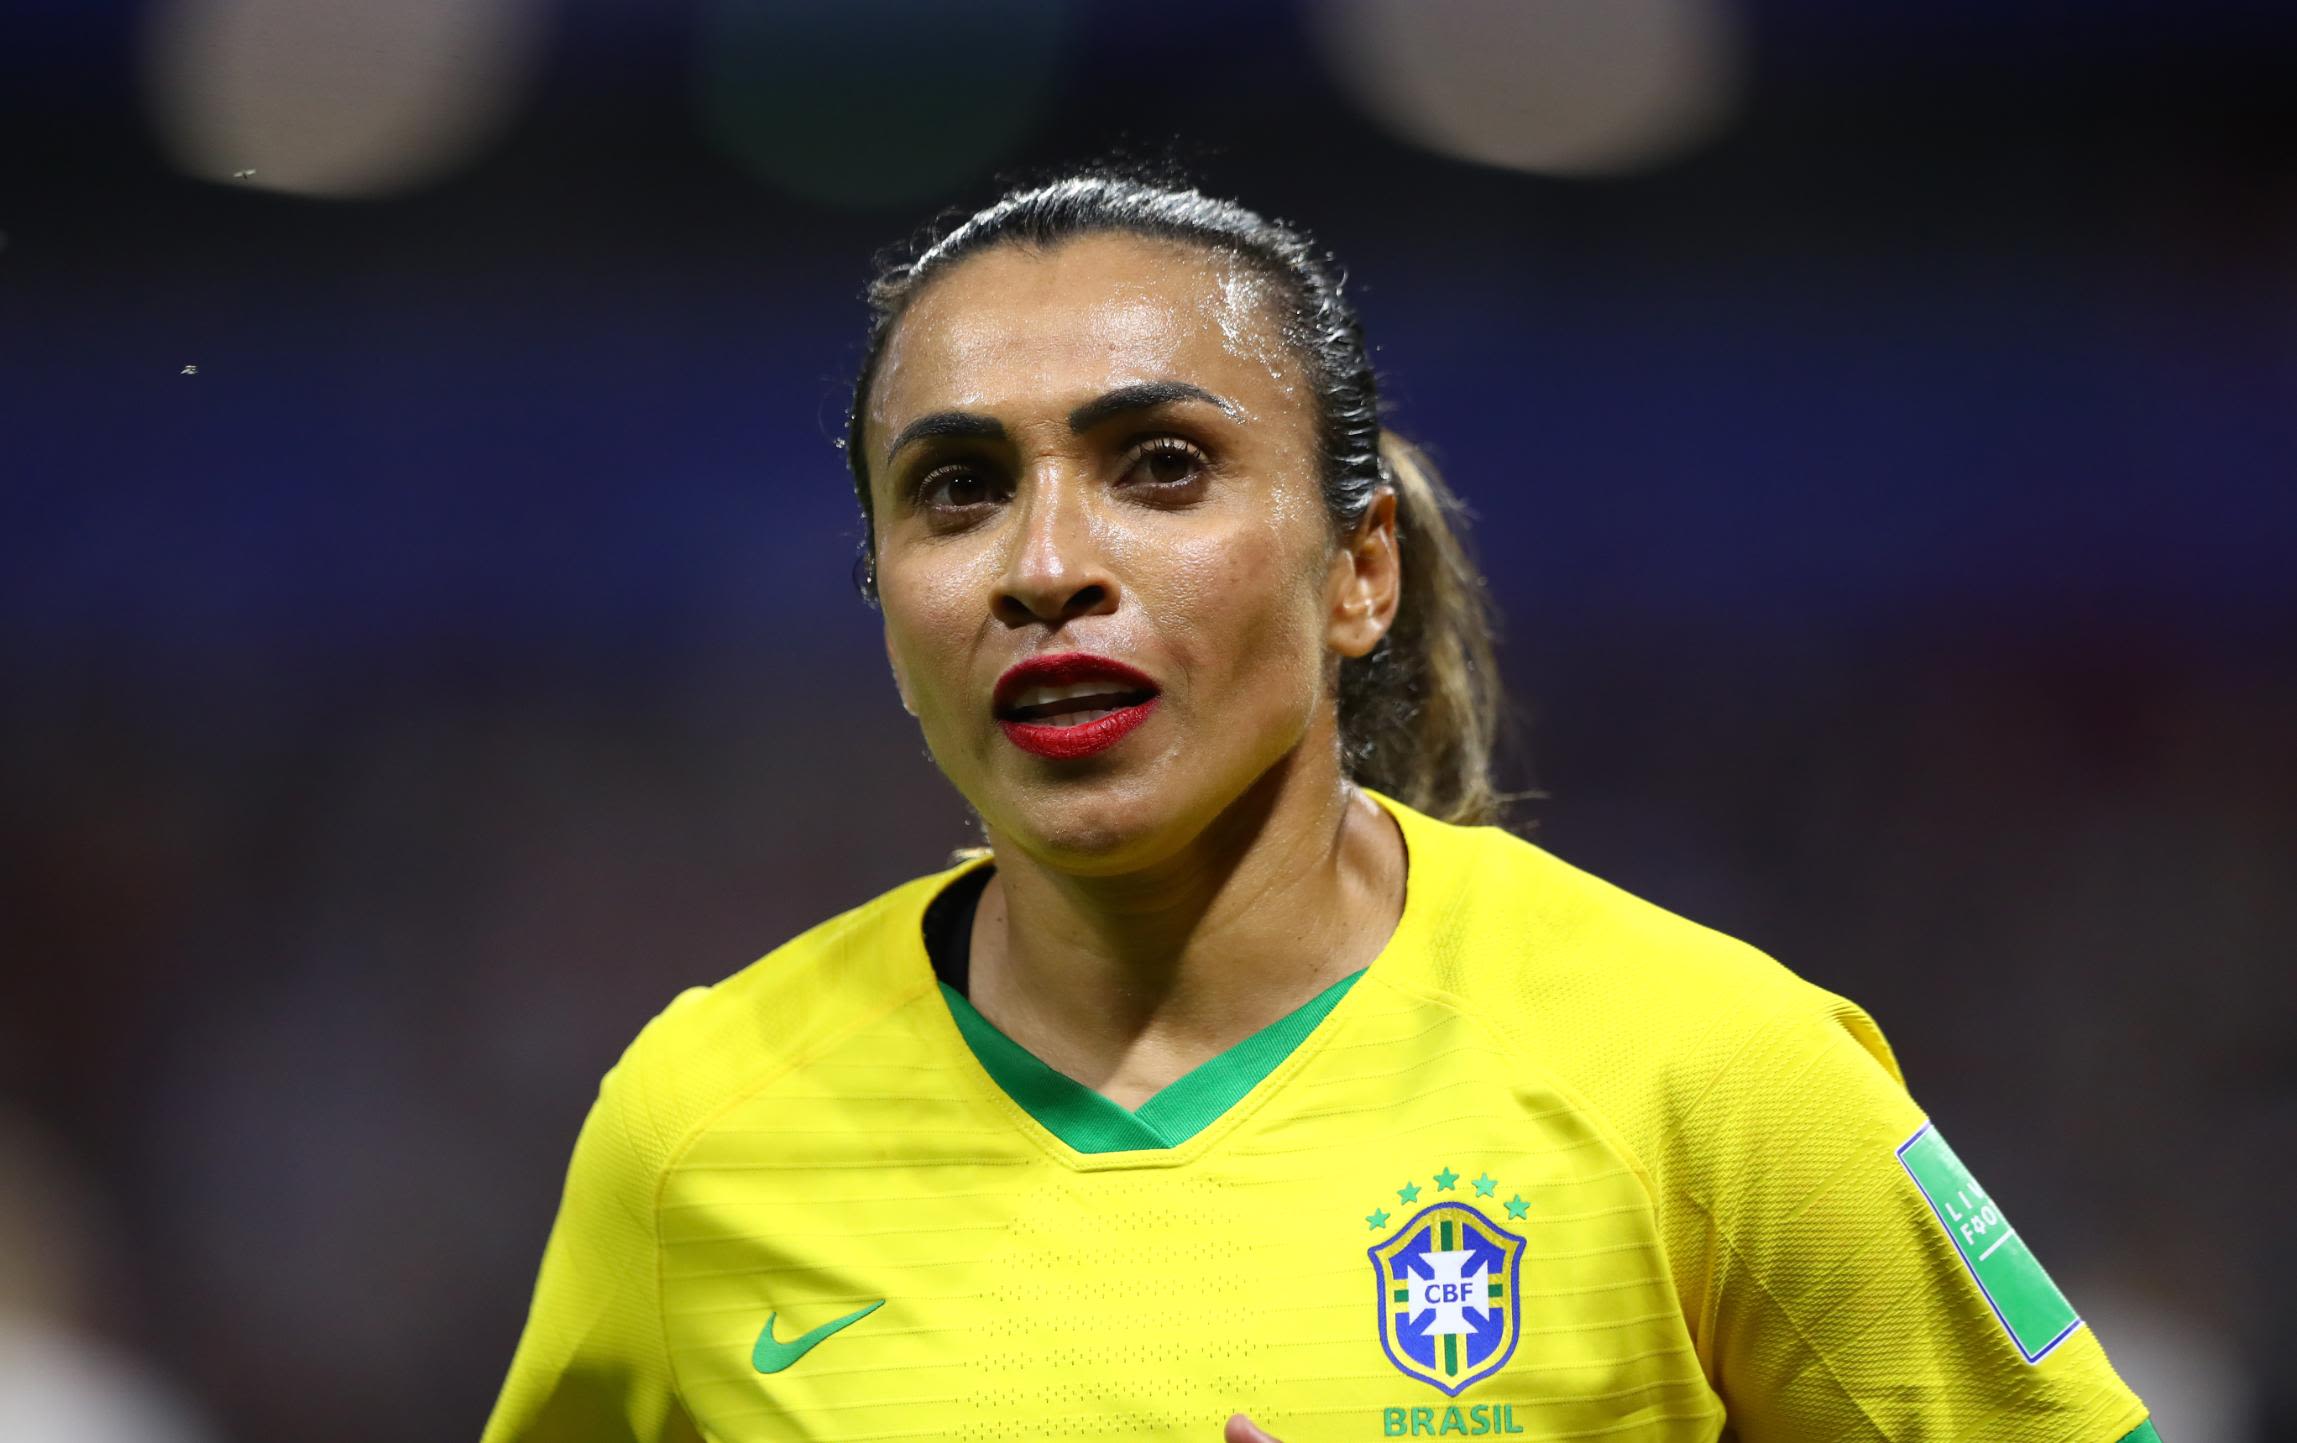 What We're Watching: Brazilian women footballers get equal pay